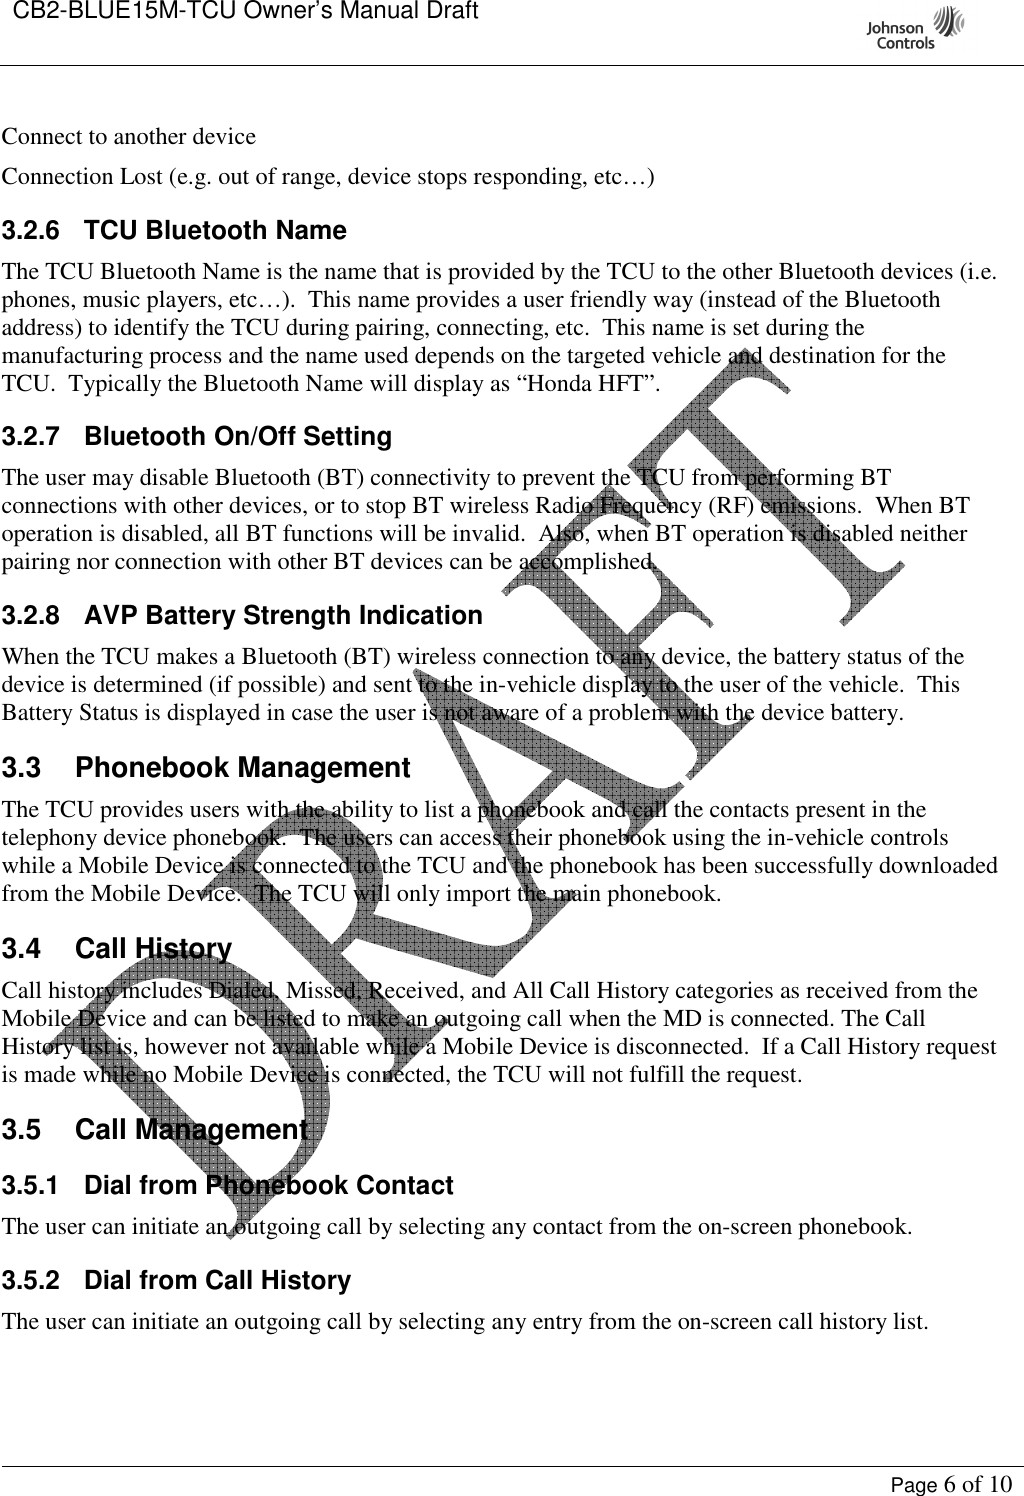 CB2-BLUE15M-TCU Owner’s Manual Draft     Page 6 of 10  Connect to another device  Connection Lost (e.g. out of range, device stops responding, etc…)  3.2.6  TCU Bluetooth Name The TCU Bluetooth Name is the name that is provided by the TCU to the other Bluetooth devices (i.e. phones, music players, etc…).  This name provides a user friendly way (instead of the Bluetooth address) to identify the TCU during pairing, connecting, etc.  This name is set during the manufacturing process and the name used depends on the targeted vehicle and destination for the TCU.  Typically the Bluetooth Name will display as “Honda HFT”. 3.2.7  Bluetooth On/Off Setting The user may disable Bluetooth (BT) connectivity to prevent the TCU from performing BT connections with other devices, or to stop BT wireless Radio Frequency (RF) emissions.  When BT operation is disabled, all BT functions will be invalid.  Also, when BT operation is disabled neither pairing nor connection with other BT devices can be accomplished. 3.2.8  AVP Battery Strength Indication When the TCU makes a Bluetooth (BT) wireless connection to any device, the battery status of the device is determined (if possible) and sent to the in-vehicle display to the user of the vehicle.  This Battery Status is displayed in case the user is not aware of a problem with the device battery.   3.3  Phonebook Management The TCU provides users with the ability to list a phonebook and call the contacts present in the telephony device phonebook.  The users can access their phonebook using the in-vehicle controls while a Mobile Device is connected to the TCU and the phonebook has been successfully downloaded from the Mobile Device.  The TCU will only import the main phonebook.   3.4  Call History Call history includes Dialed, Missed, Received, and All Call History categories as received from the Mobile Device and can be listed to make an outgoing call when the MD is connected. The Call History list is, however not available while a Mobile Device is disconnected.  If a Call History request is made while no Mobile Device is connected, the TCU will not fulfill the request. 3.5  Call Management 3.5.1  Dial from Phonebook Contact The user can initiate an outgoing call by selecting any contact from the on-screen phonebook. 3.5.2  Dial from Call History The user can initiate an outgoing call by selecting any entry from the on-screen call history list. 